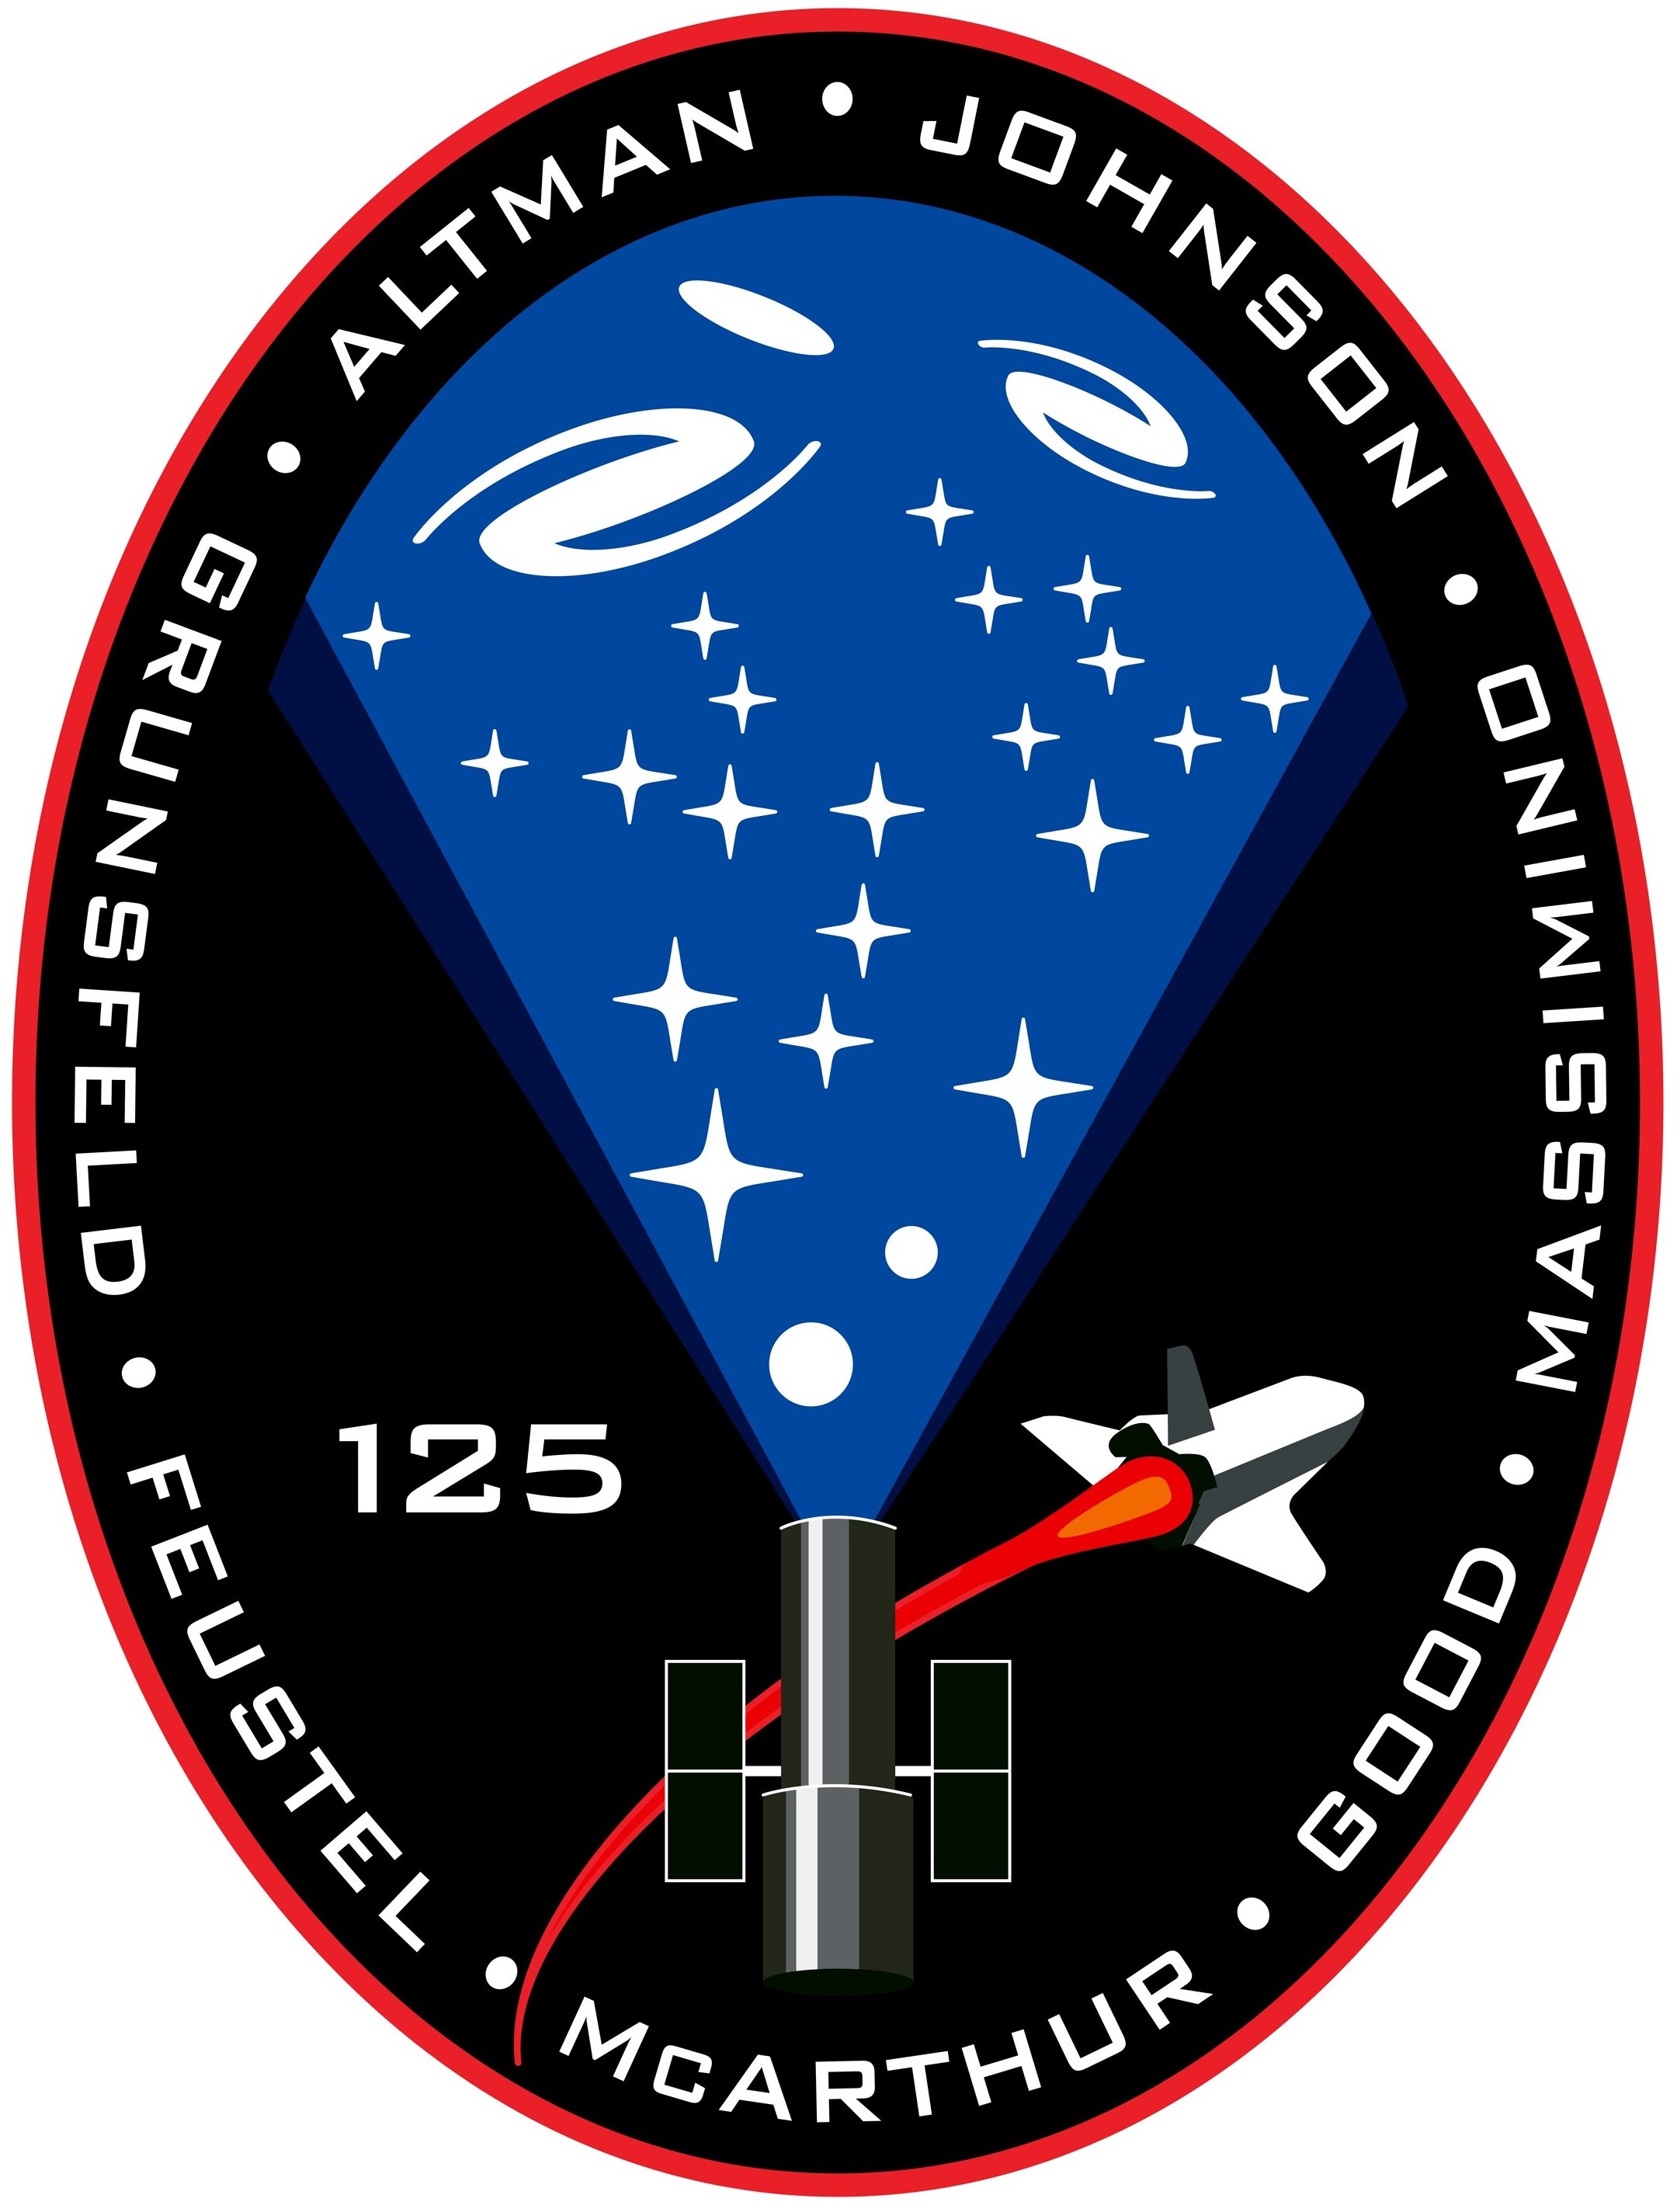 The STS-125 crew patch